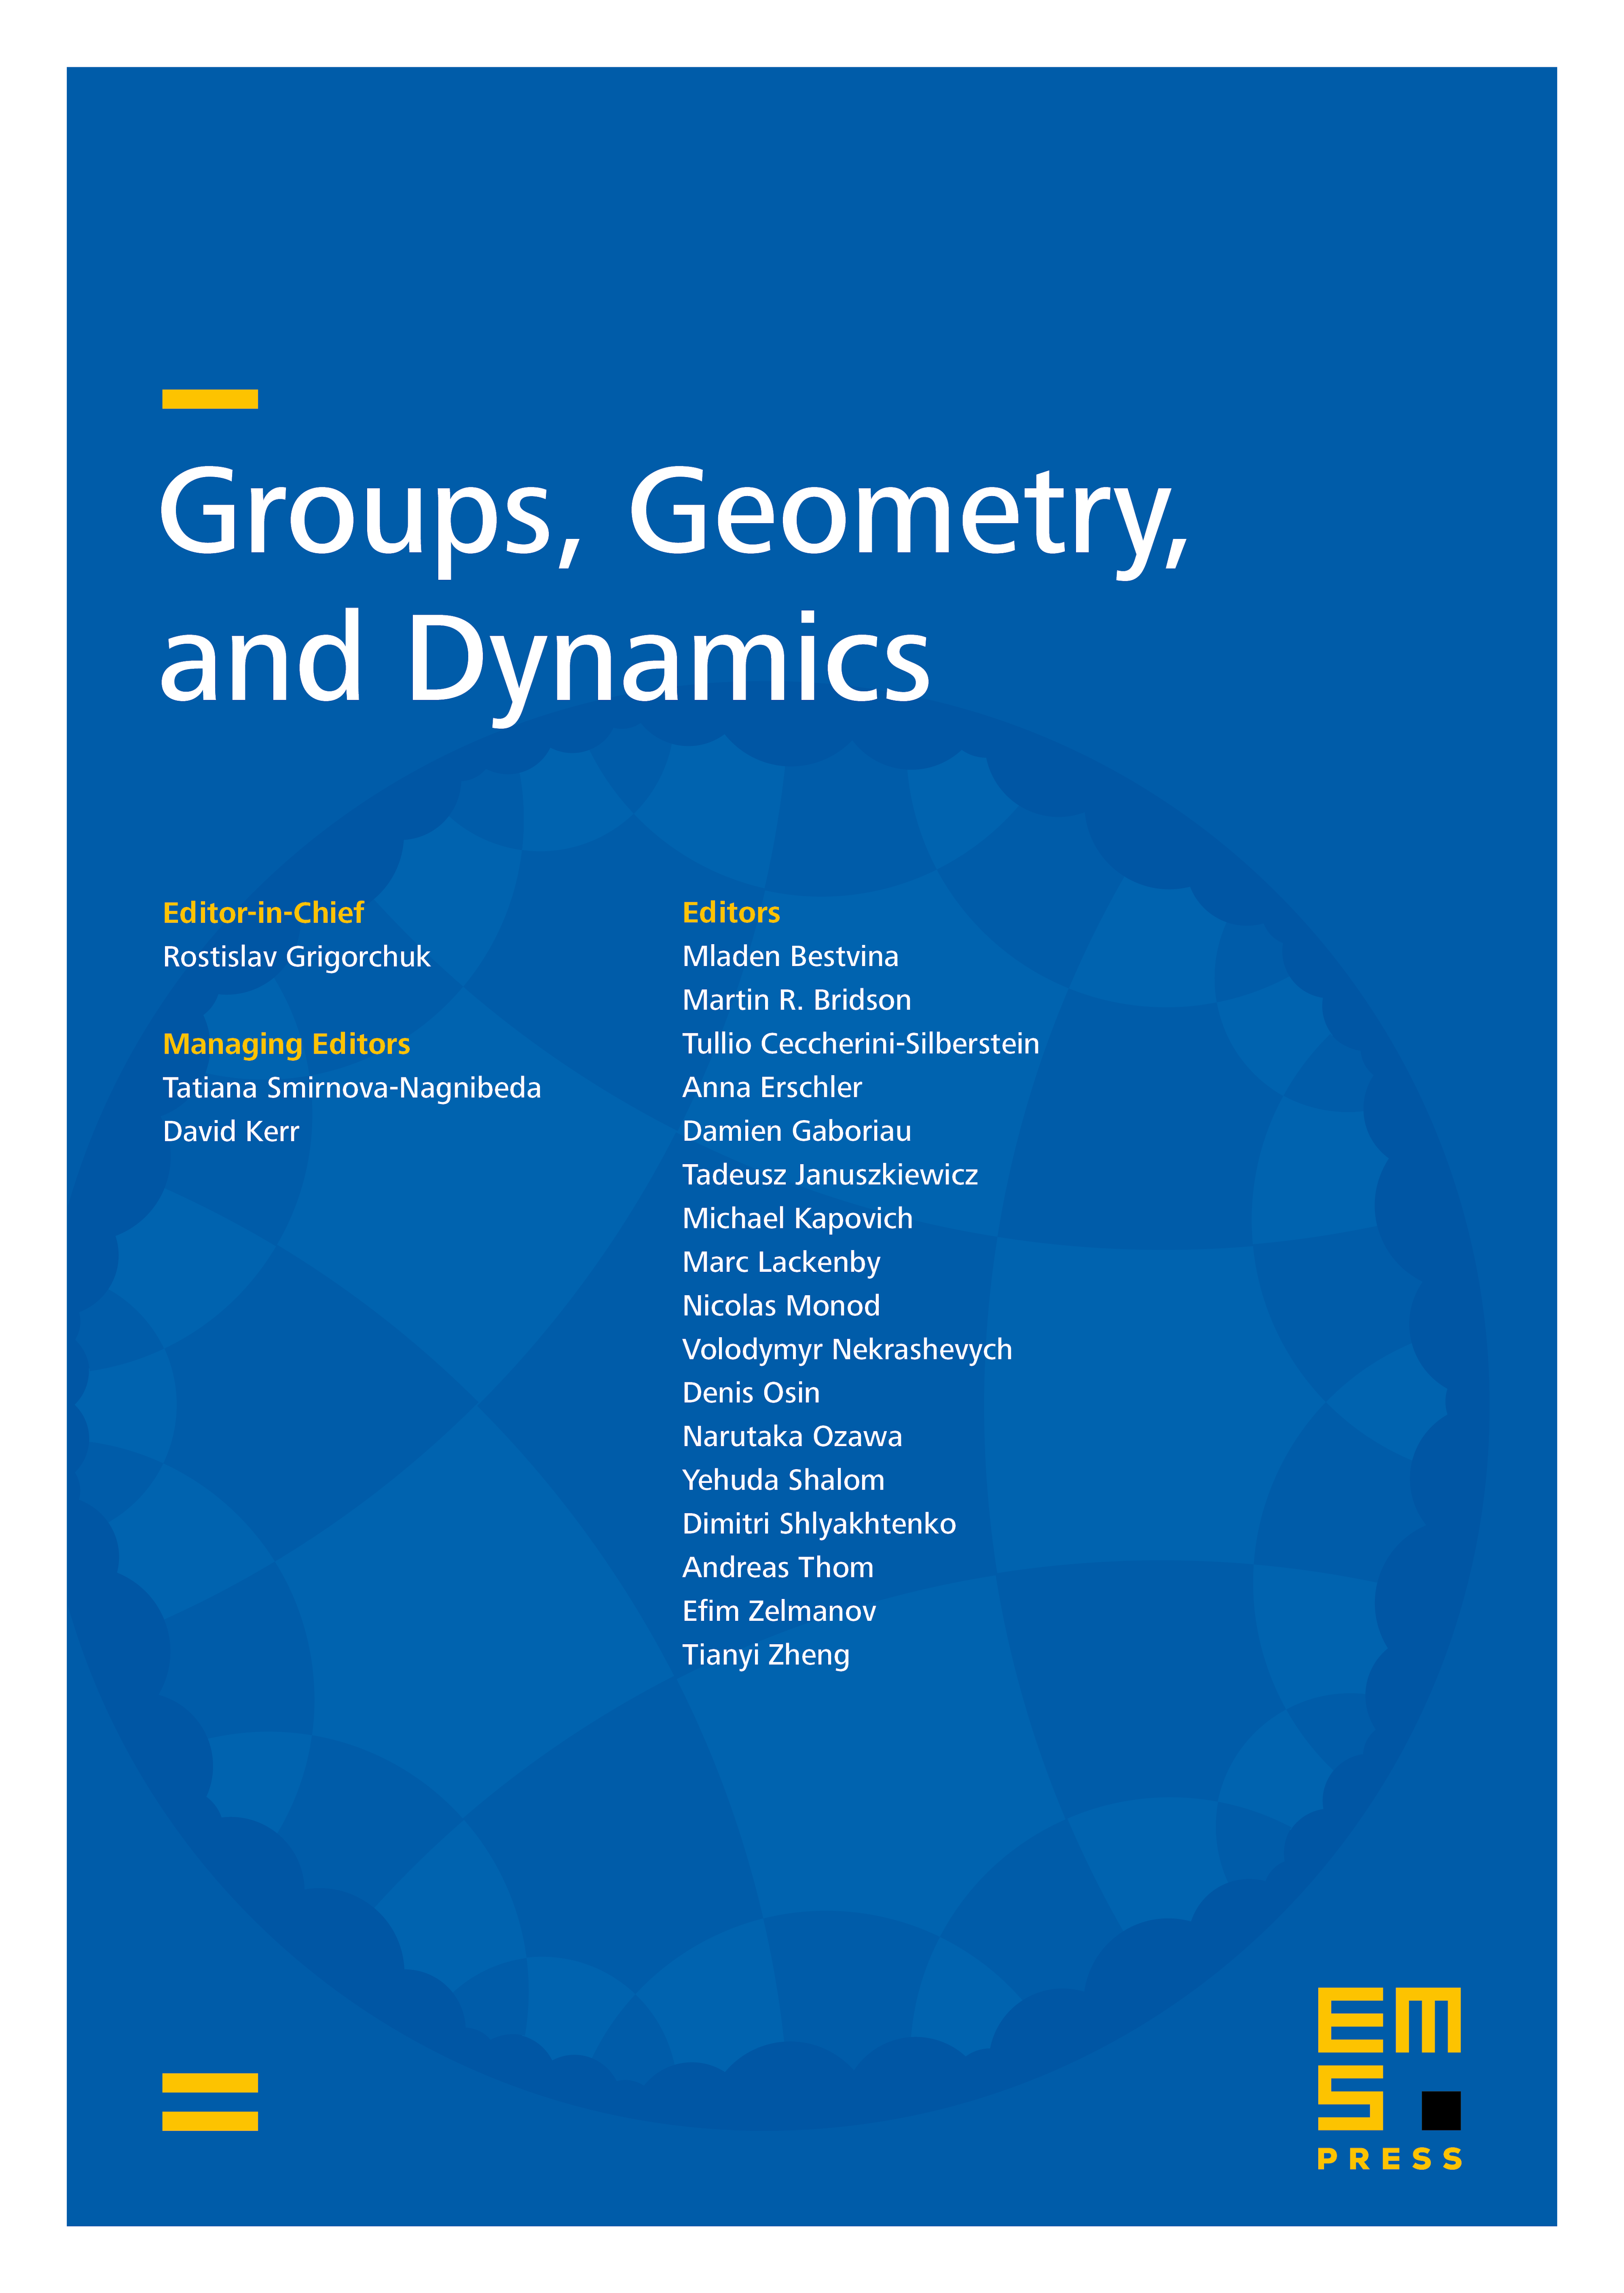 Cofinitely Hopfian groups, open mappings and knot complements cover